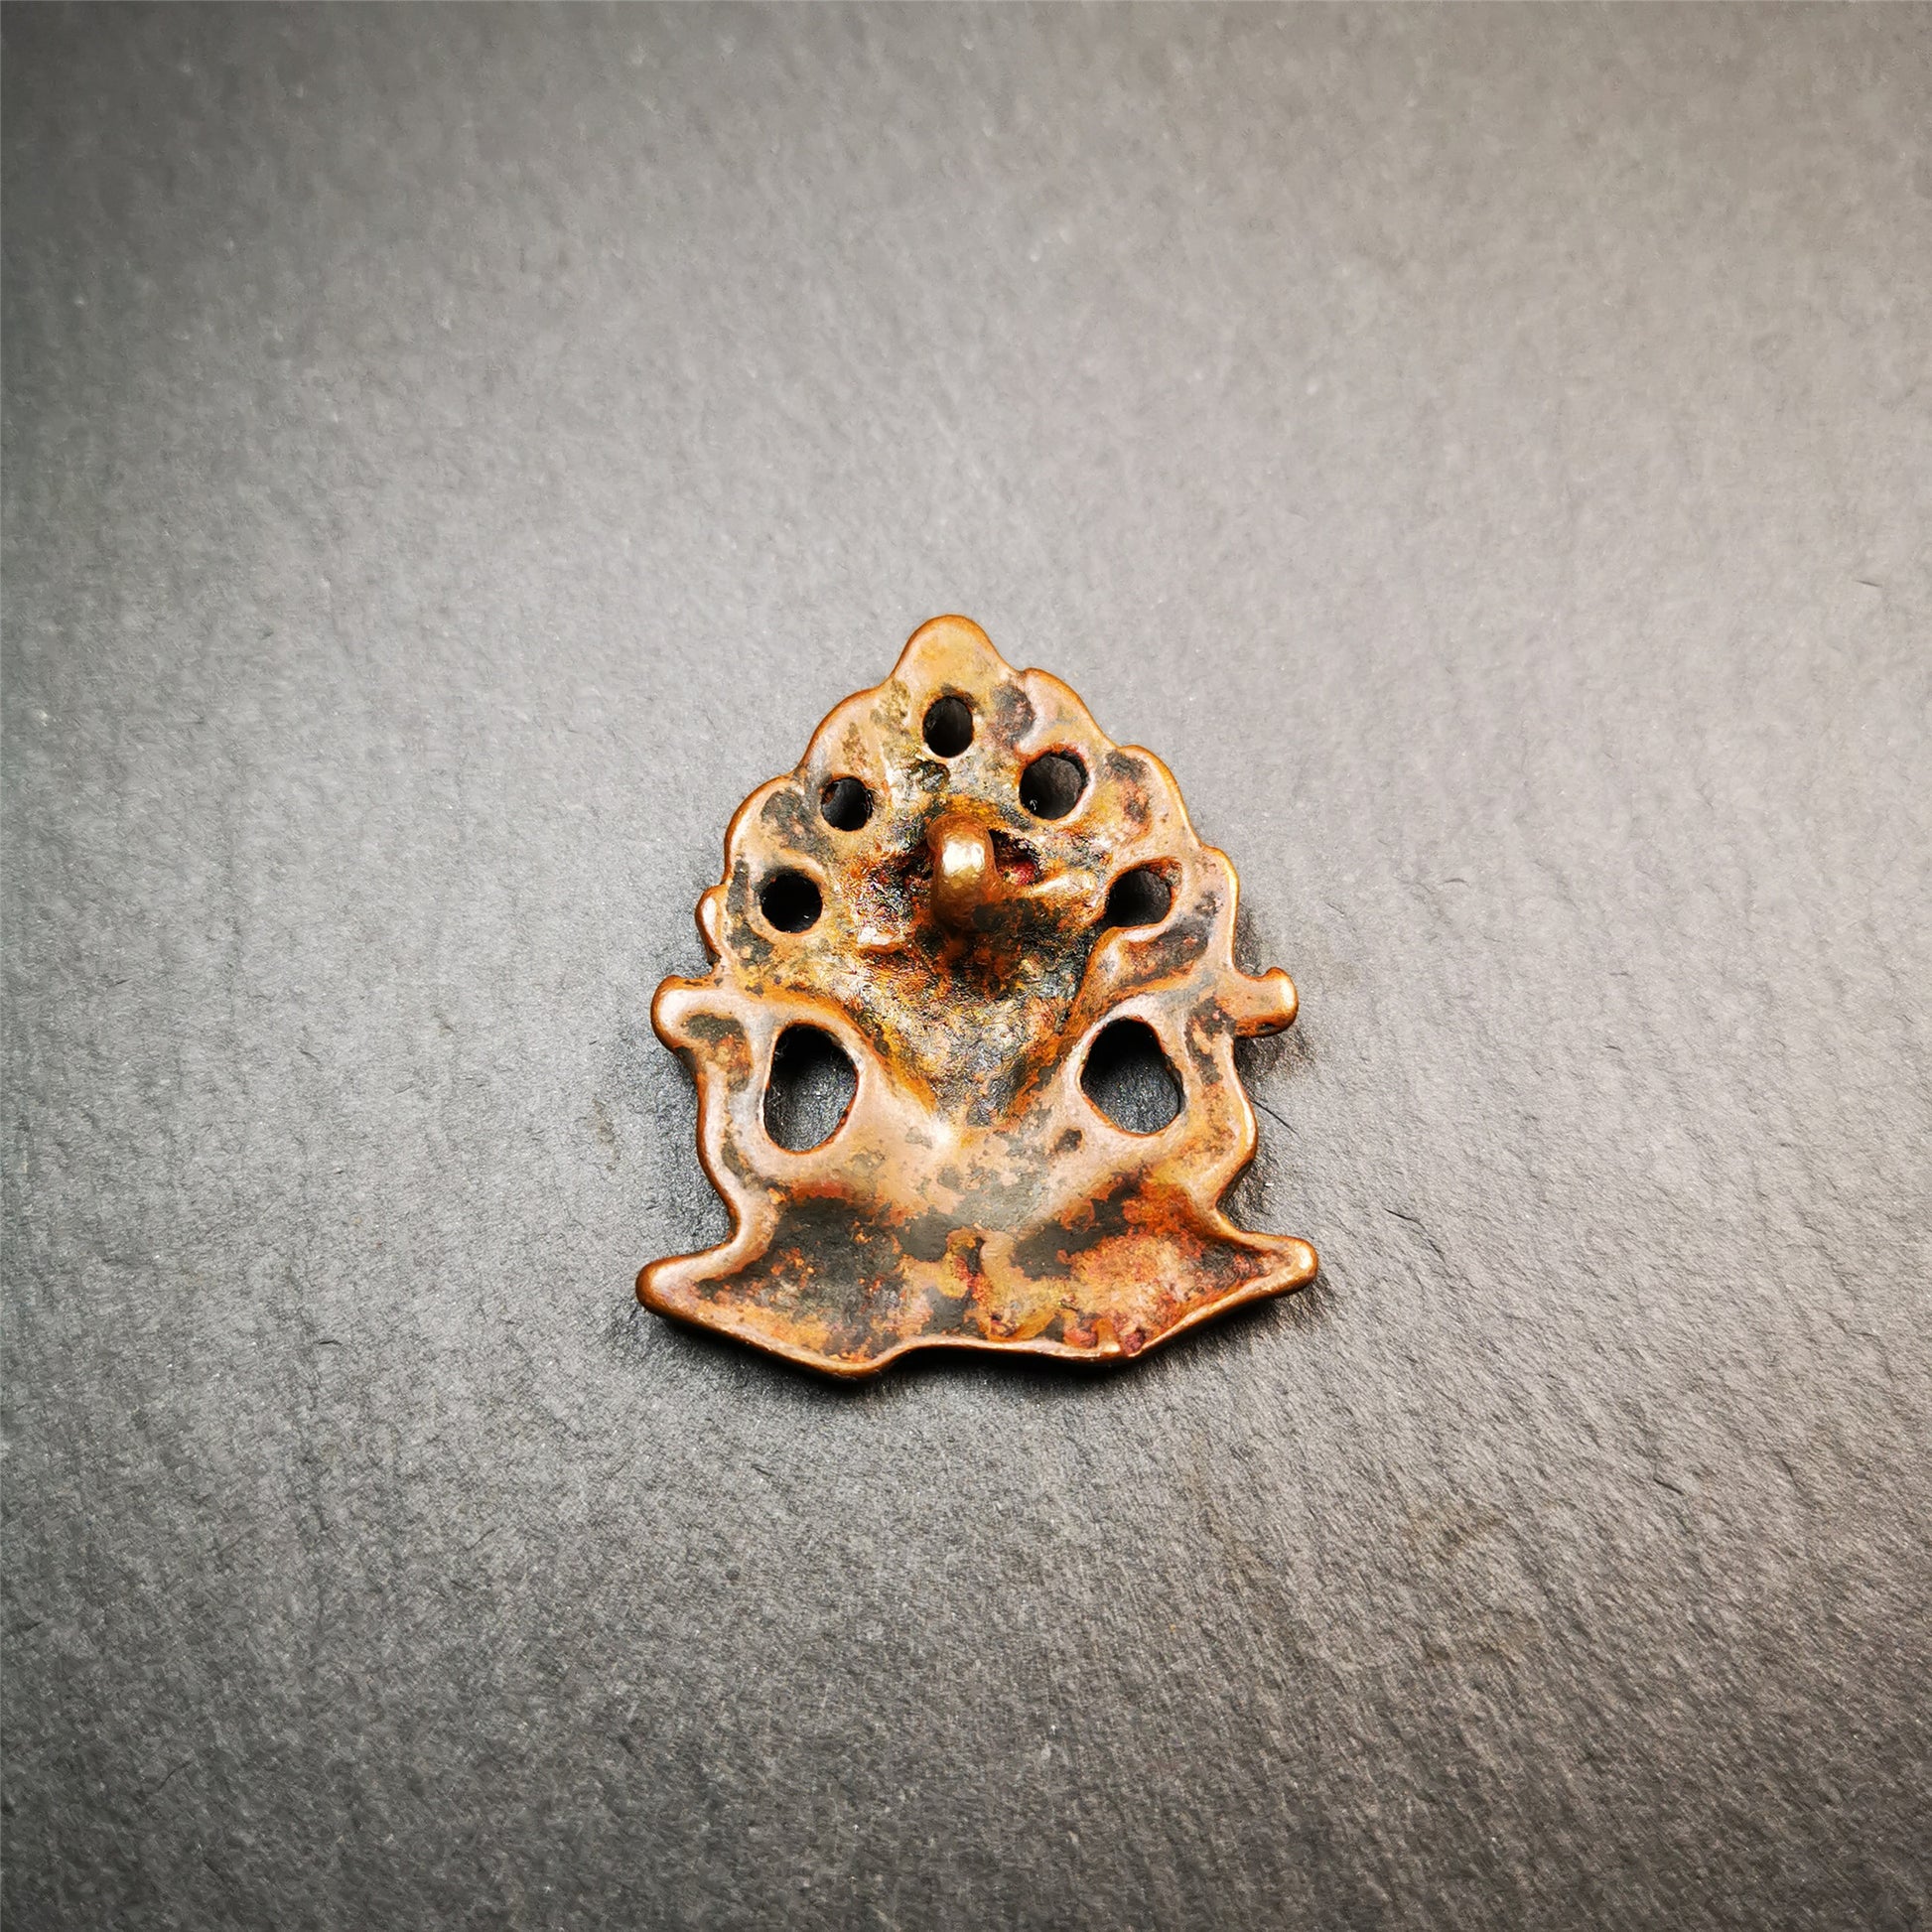 This mani jewel amulet was collect from Gengqing Monastery Tibet,it is an old badge or amulet pandent, made of copper, the shape is the mysterious mintamani. 